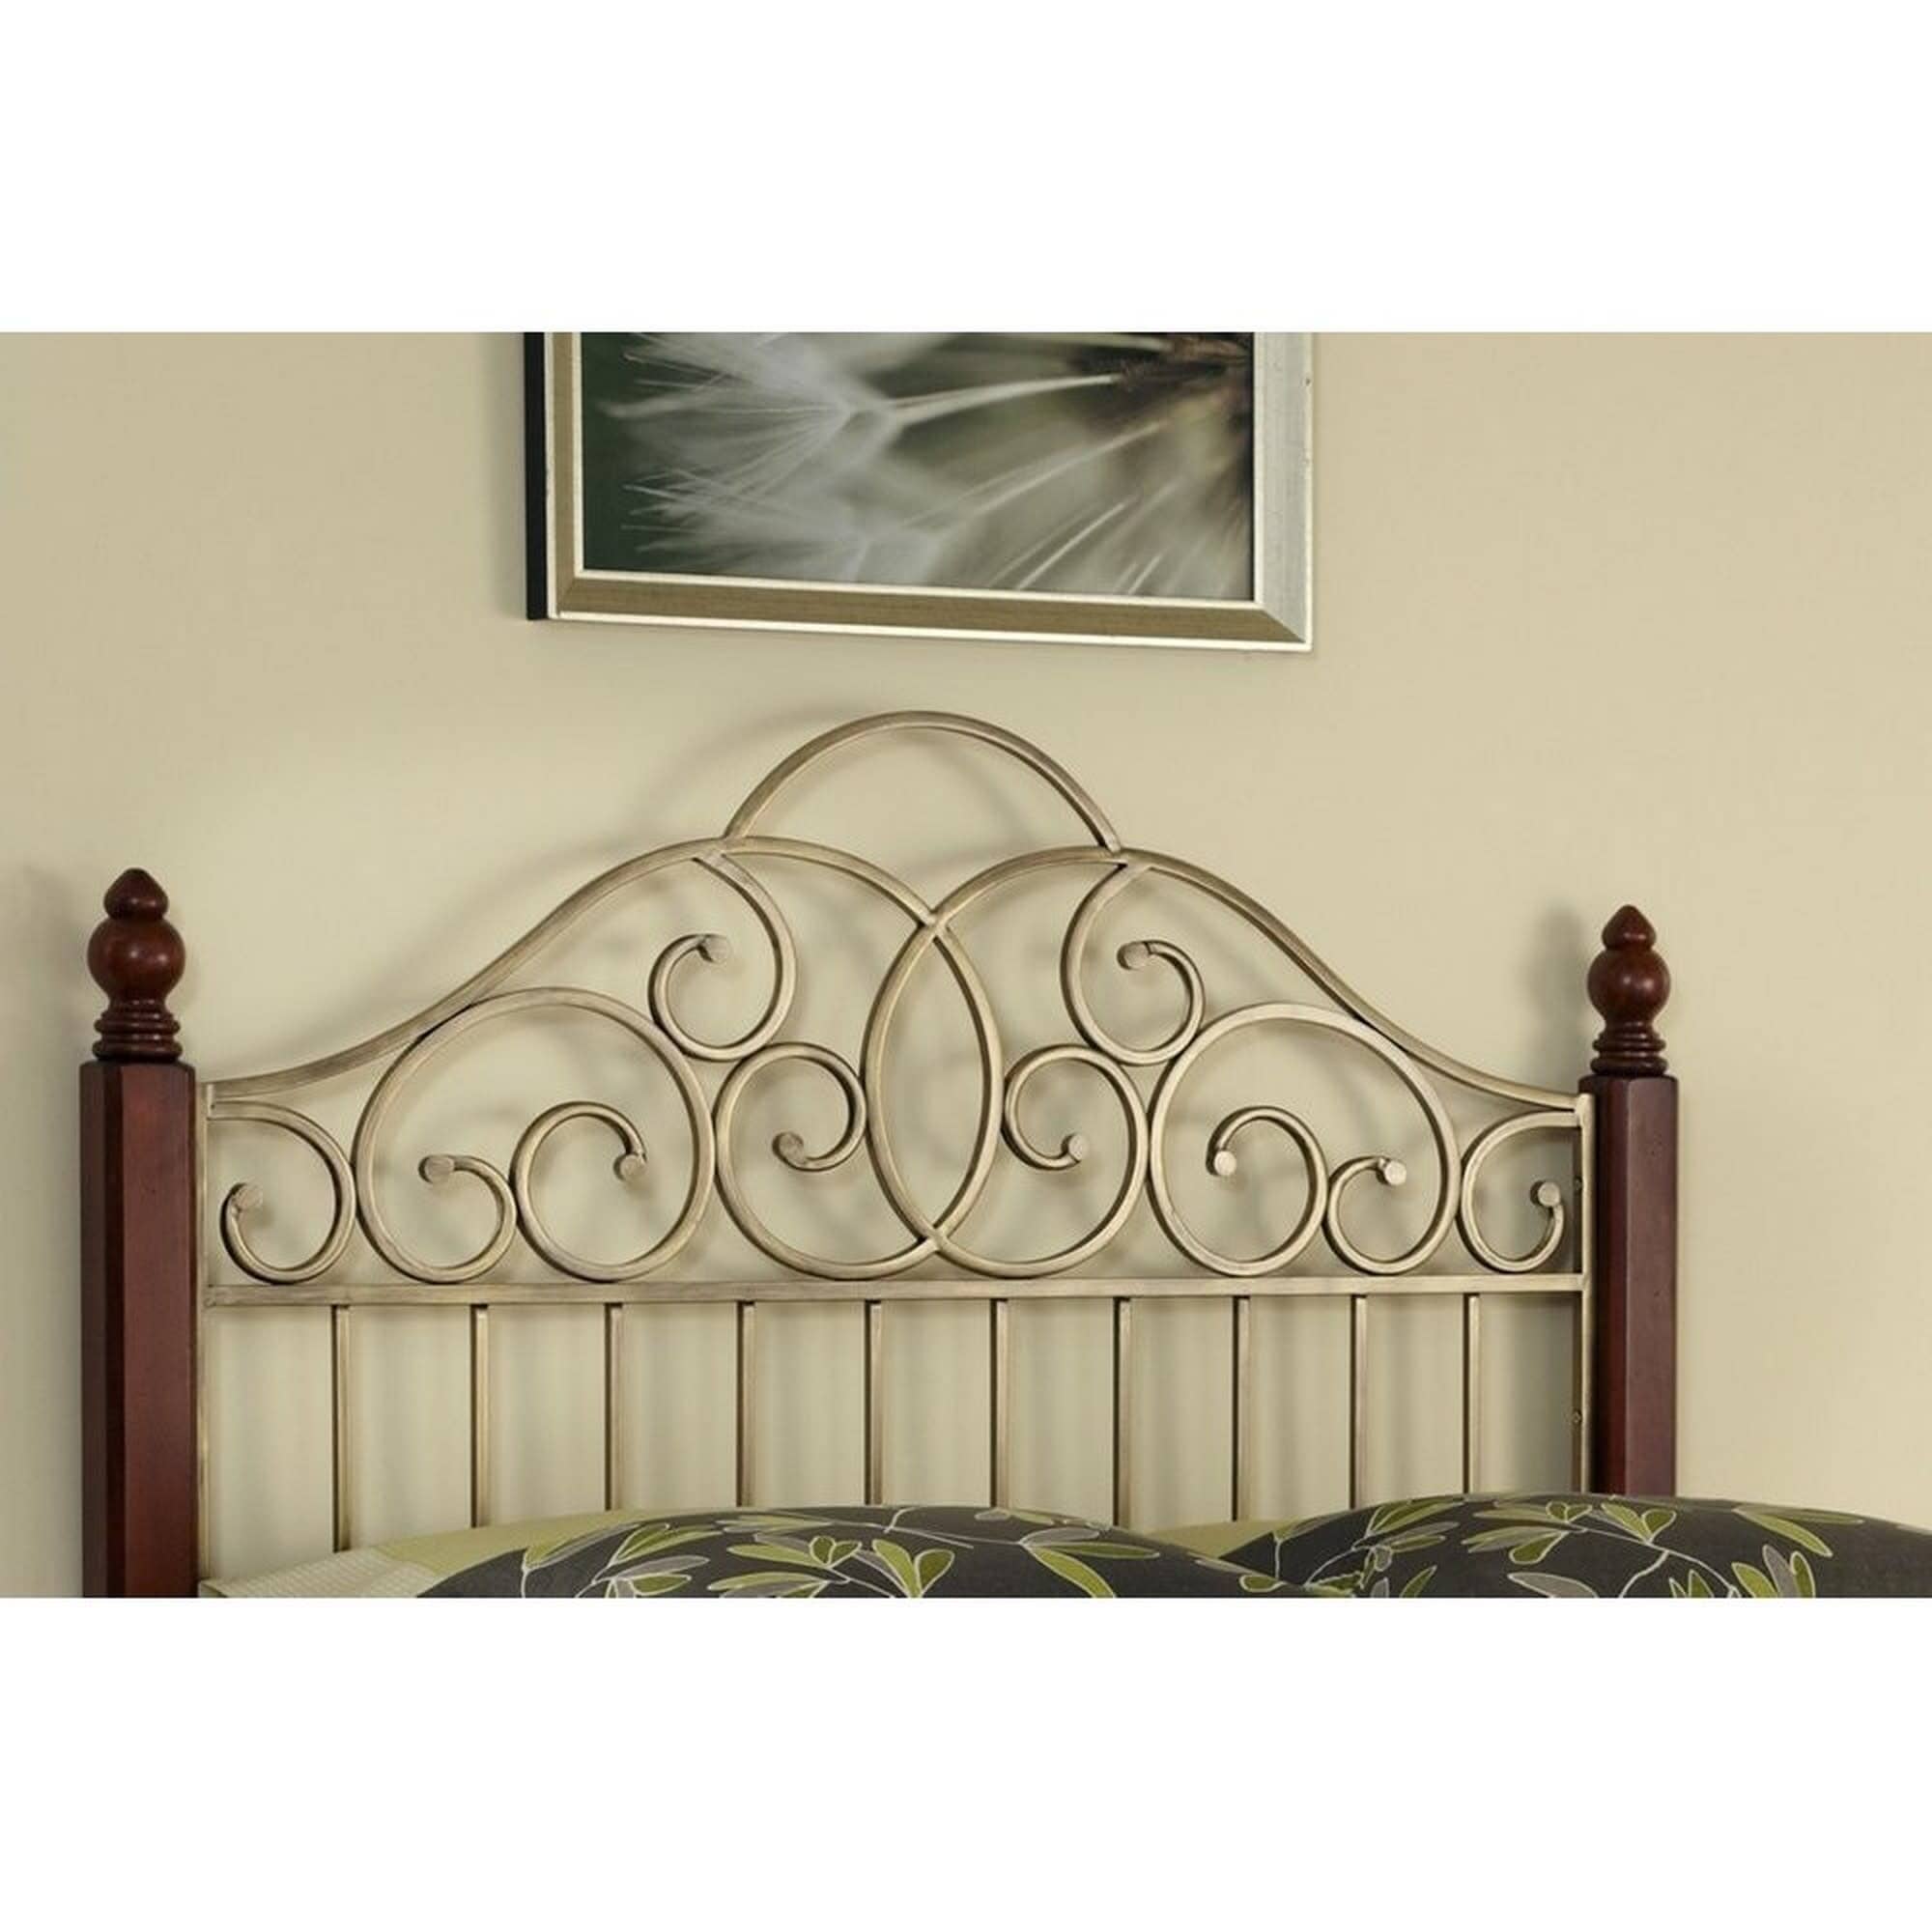 Traditional King Headboard By St. Ives King Headboard St. Ives